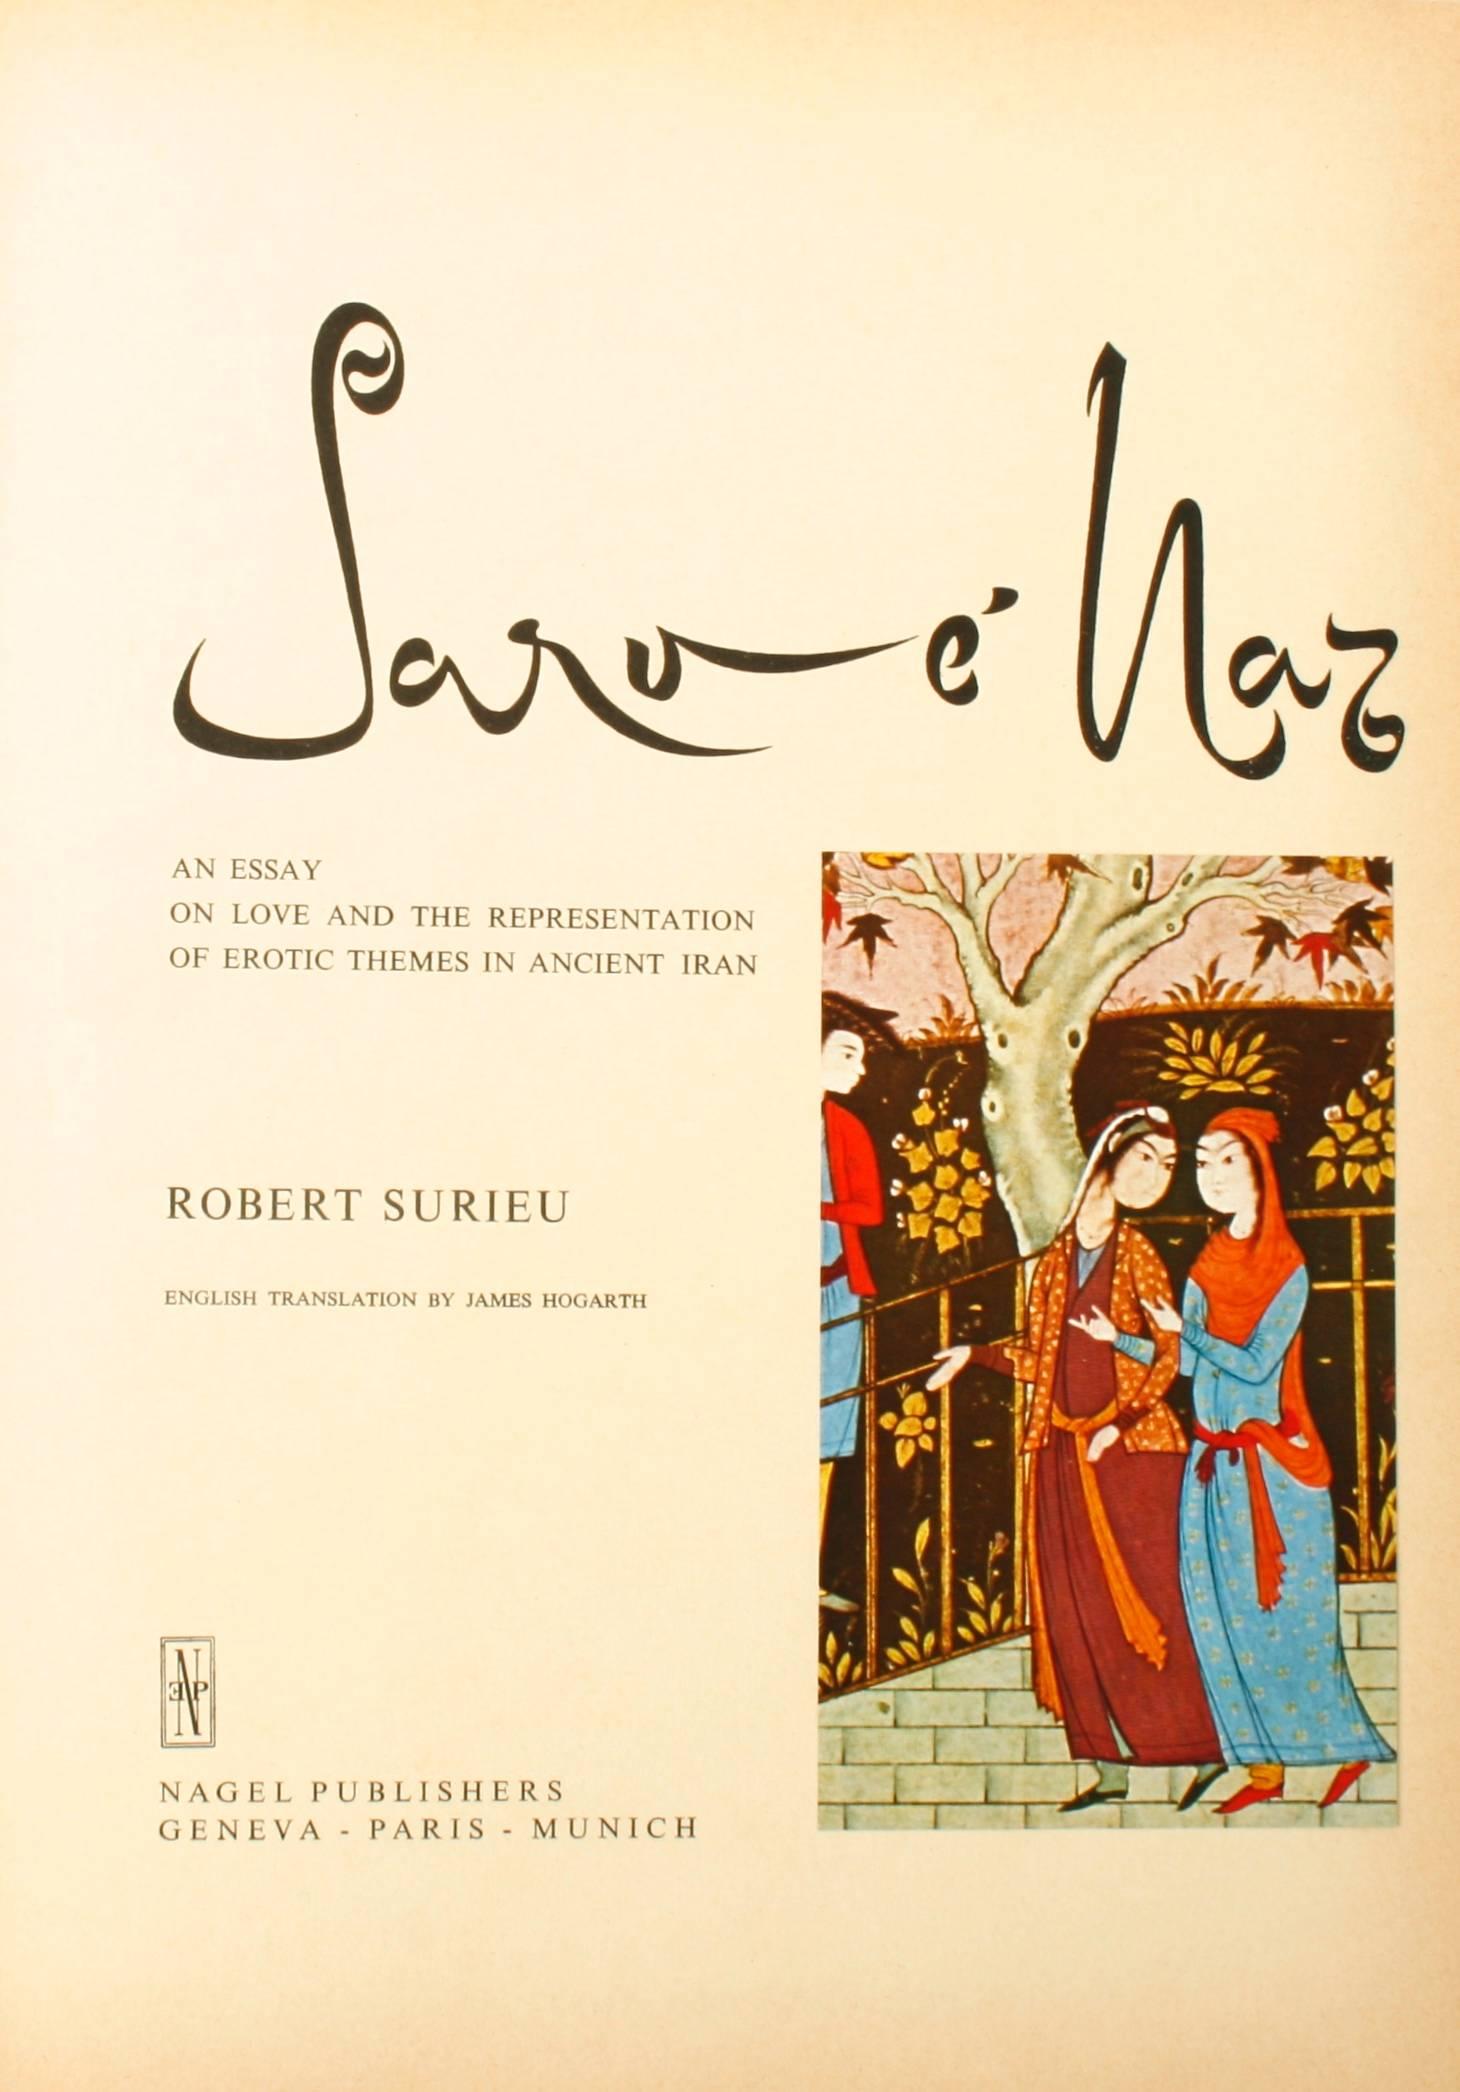 Sara é Naz, An essay on love and the representation of erotic themes in Ancient Iran by Robert Surieu. Geneva: Bagel Publishers, 1967. First English edition hardcover with dust jacket. 186 pp. Sixth in a series of books called unknown treasures.